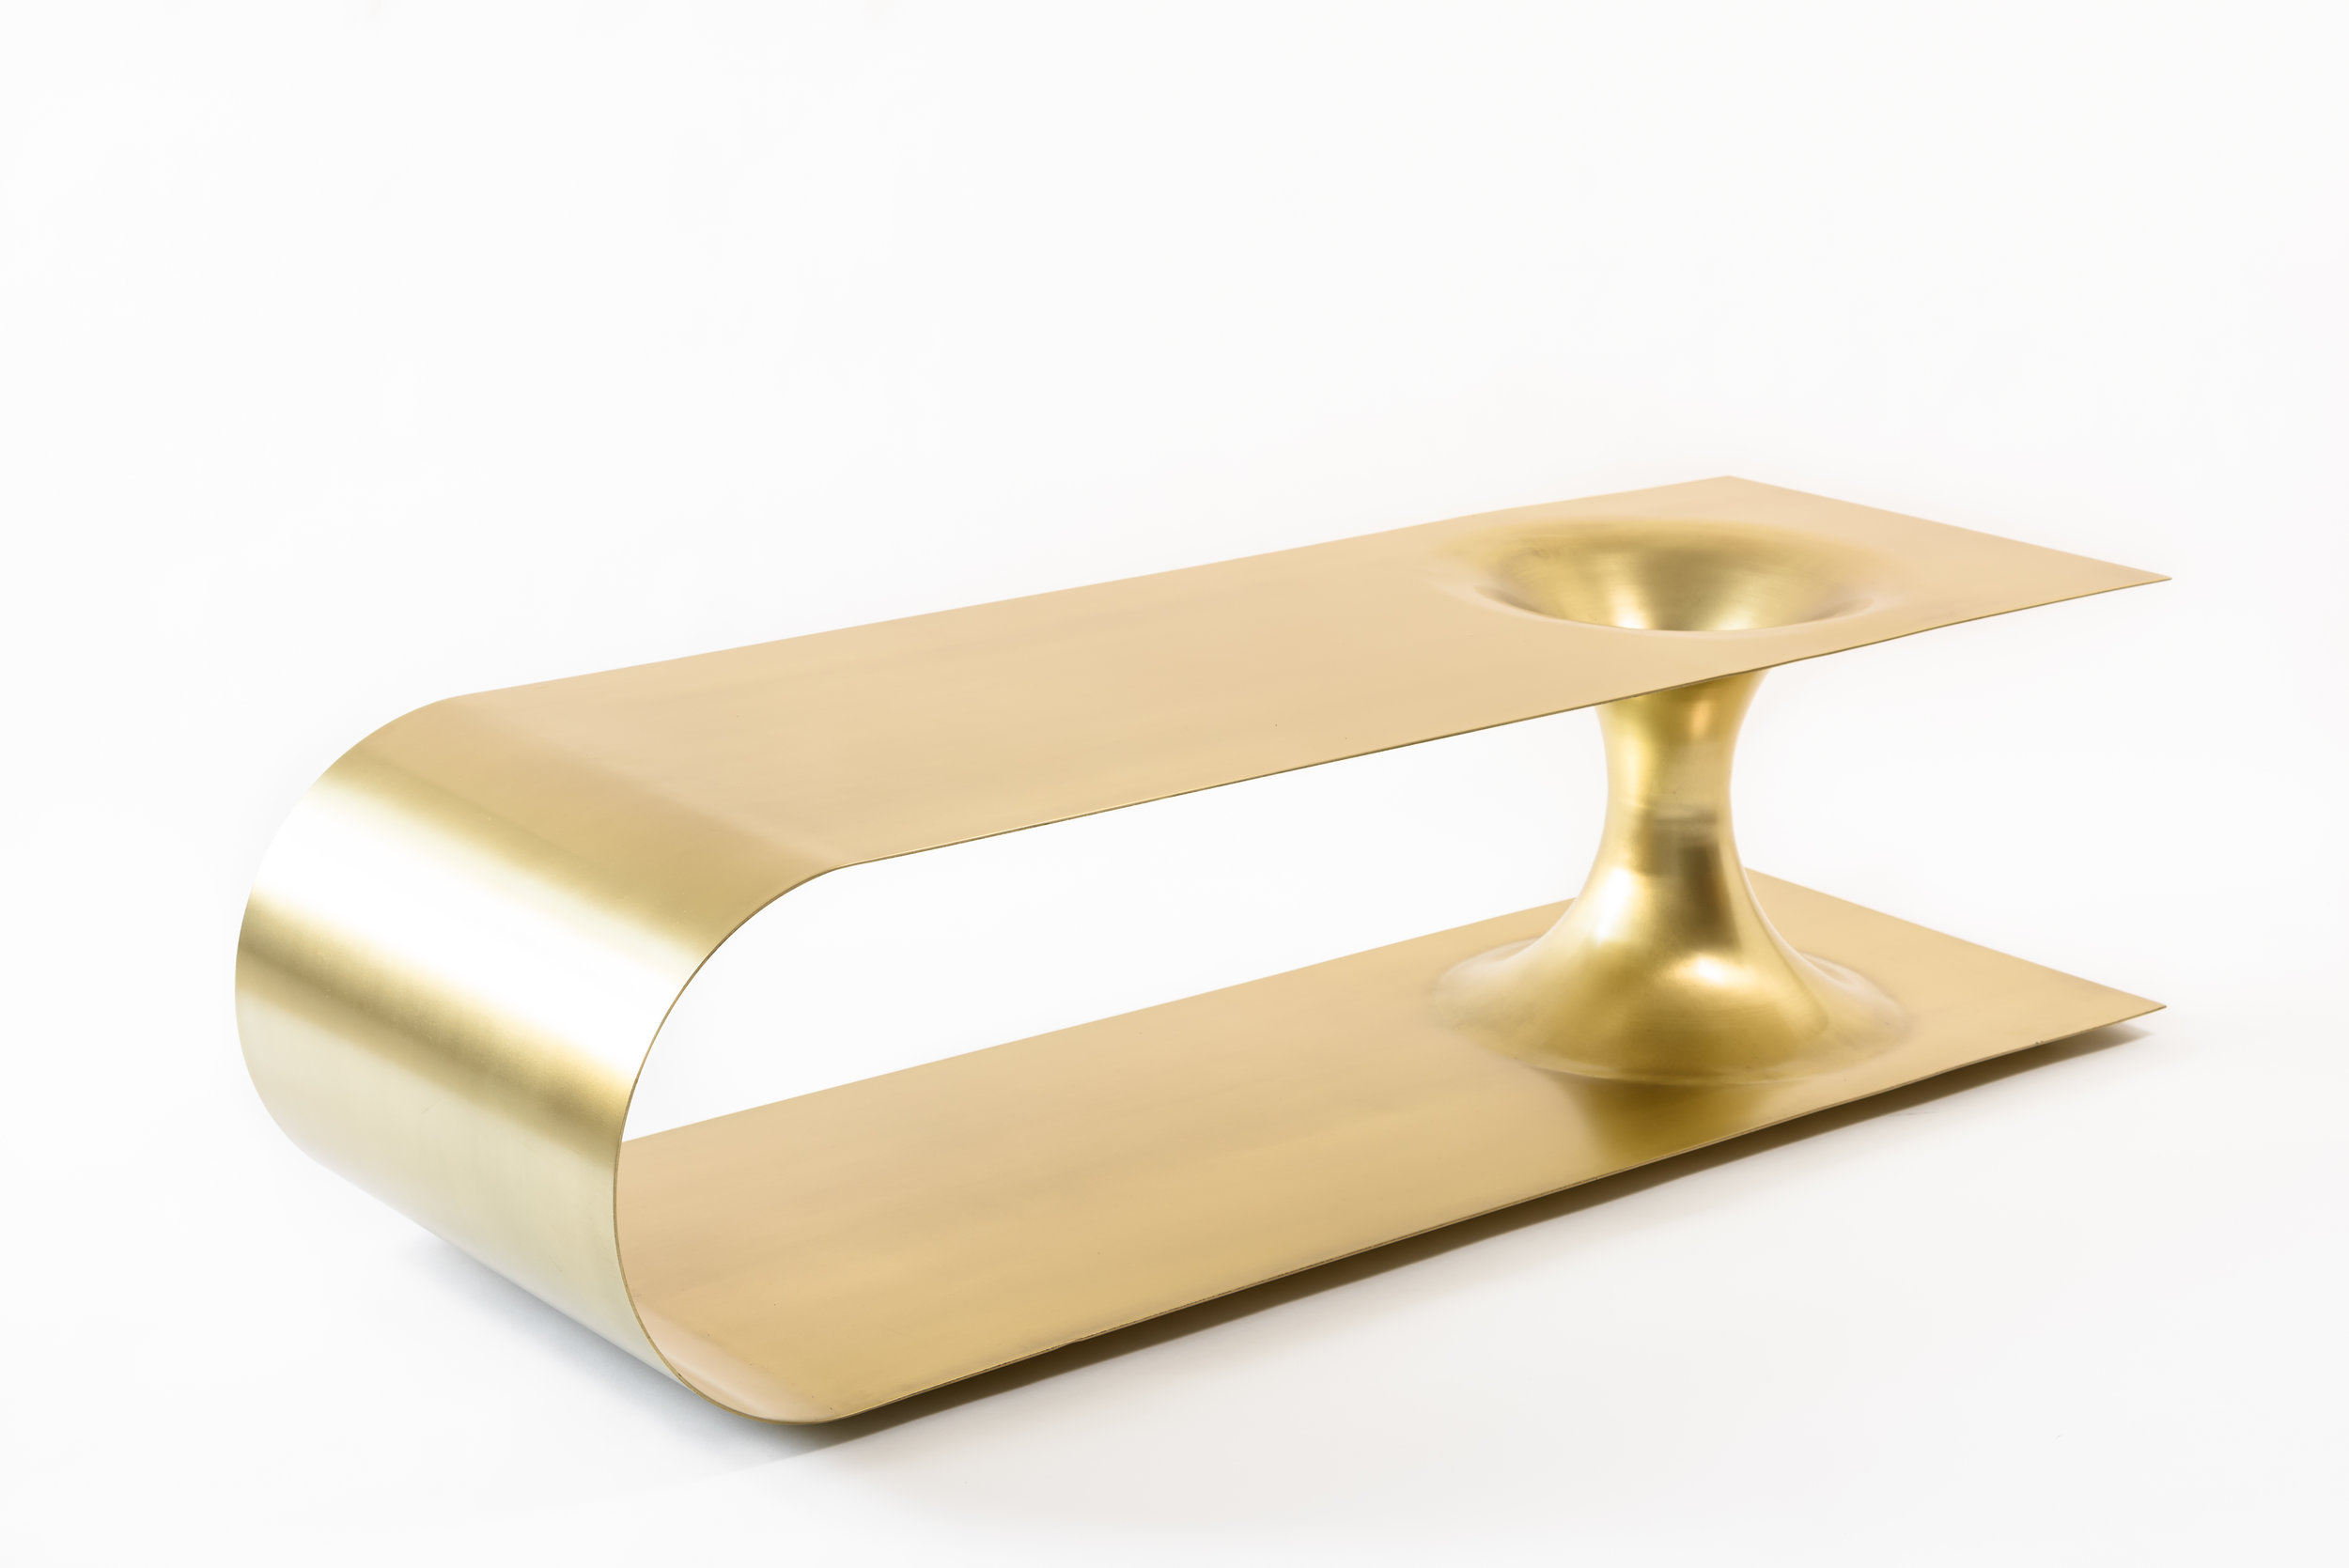   Brass plated steel   Brushed finish 60” L x 20” D x 15.5” H  